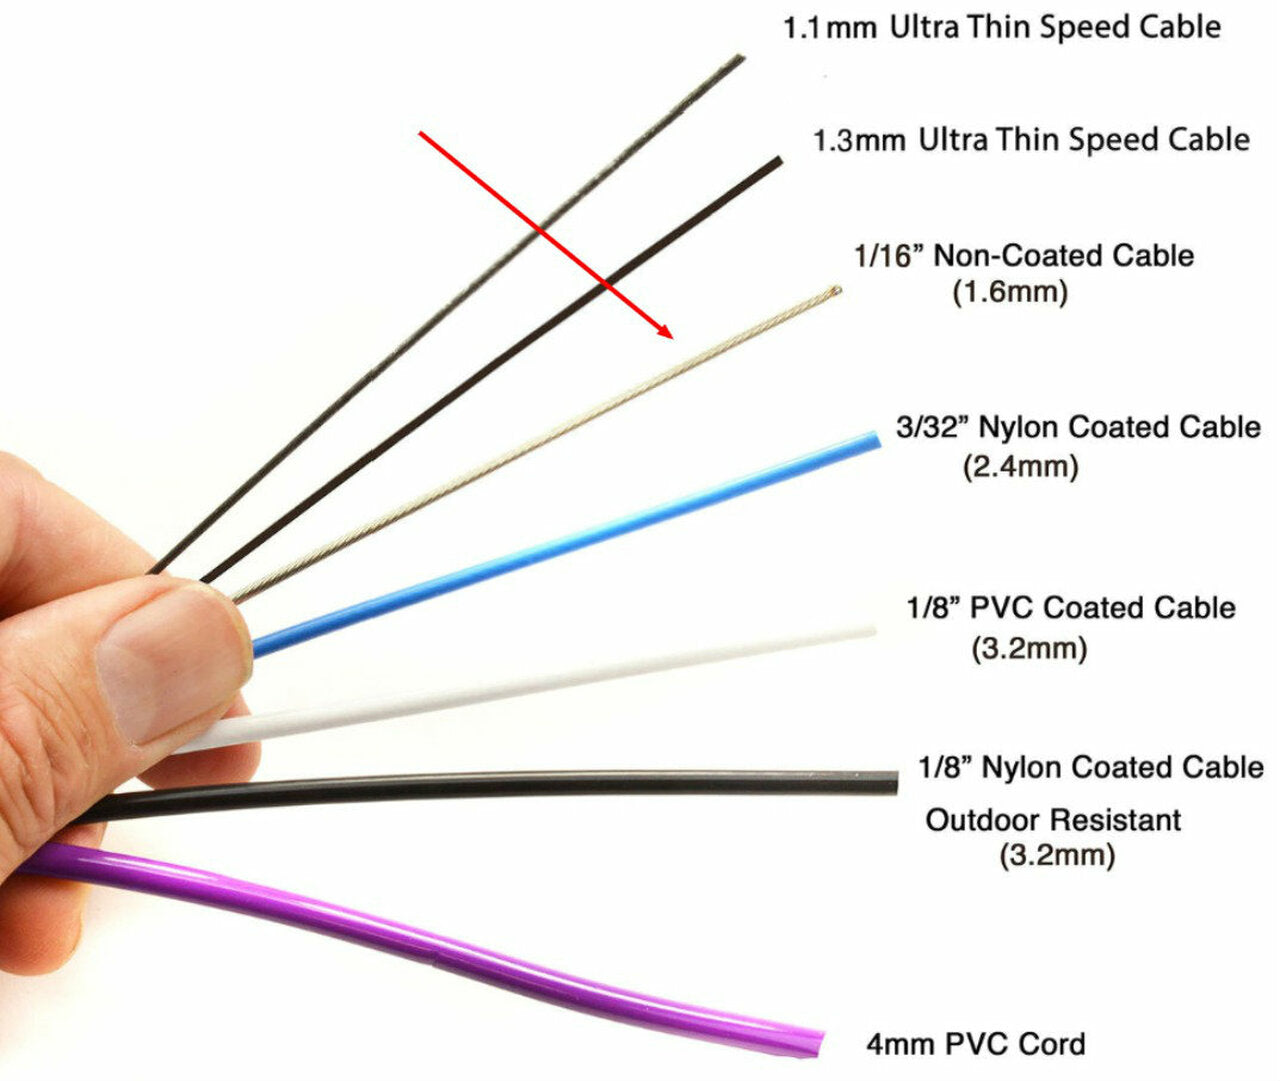 Replacement - Non-Coated Bare Wire Cable